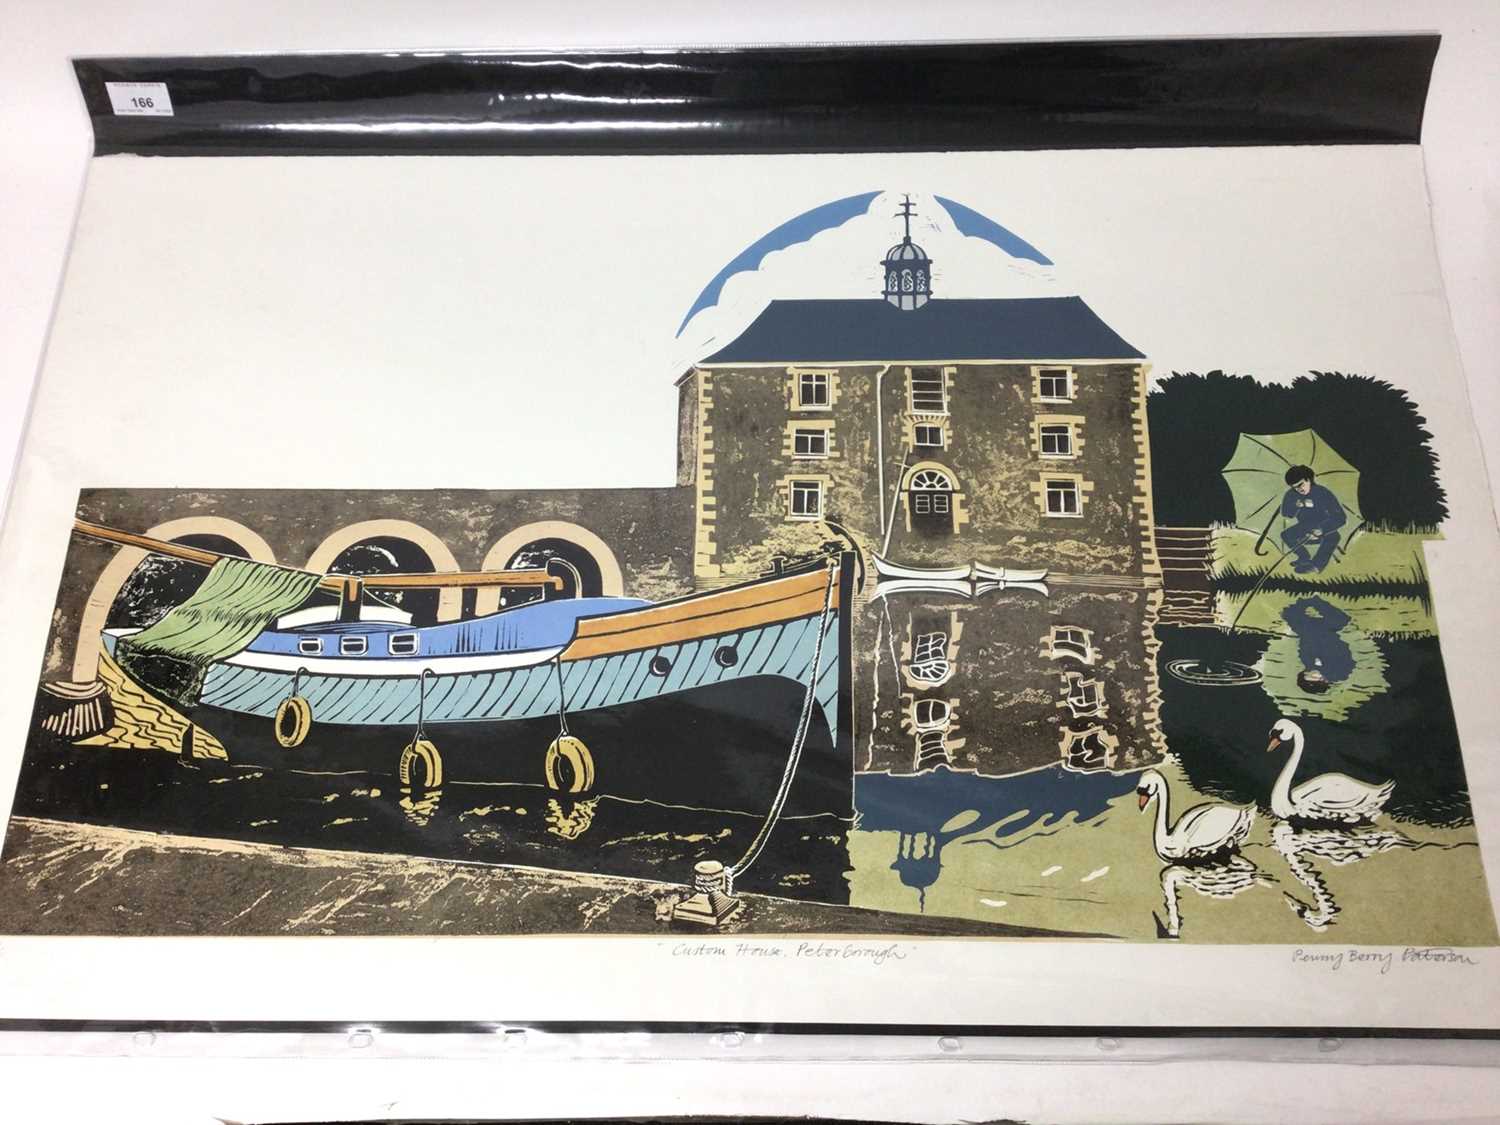 Lot 166 - Penny Berry Paterson (1941-2021) colour linocut- Custom House, Peterborough, image 47 x 75cm, signed titled and inscribed H/C